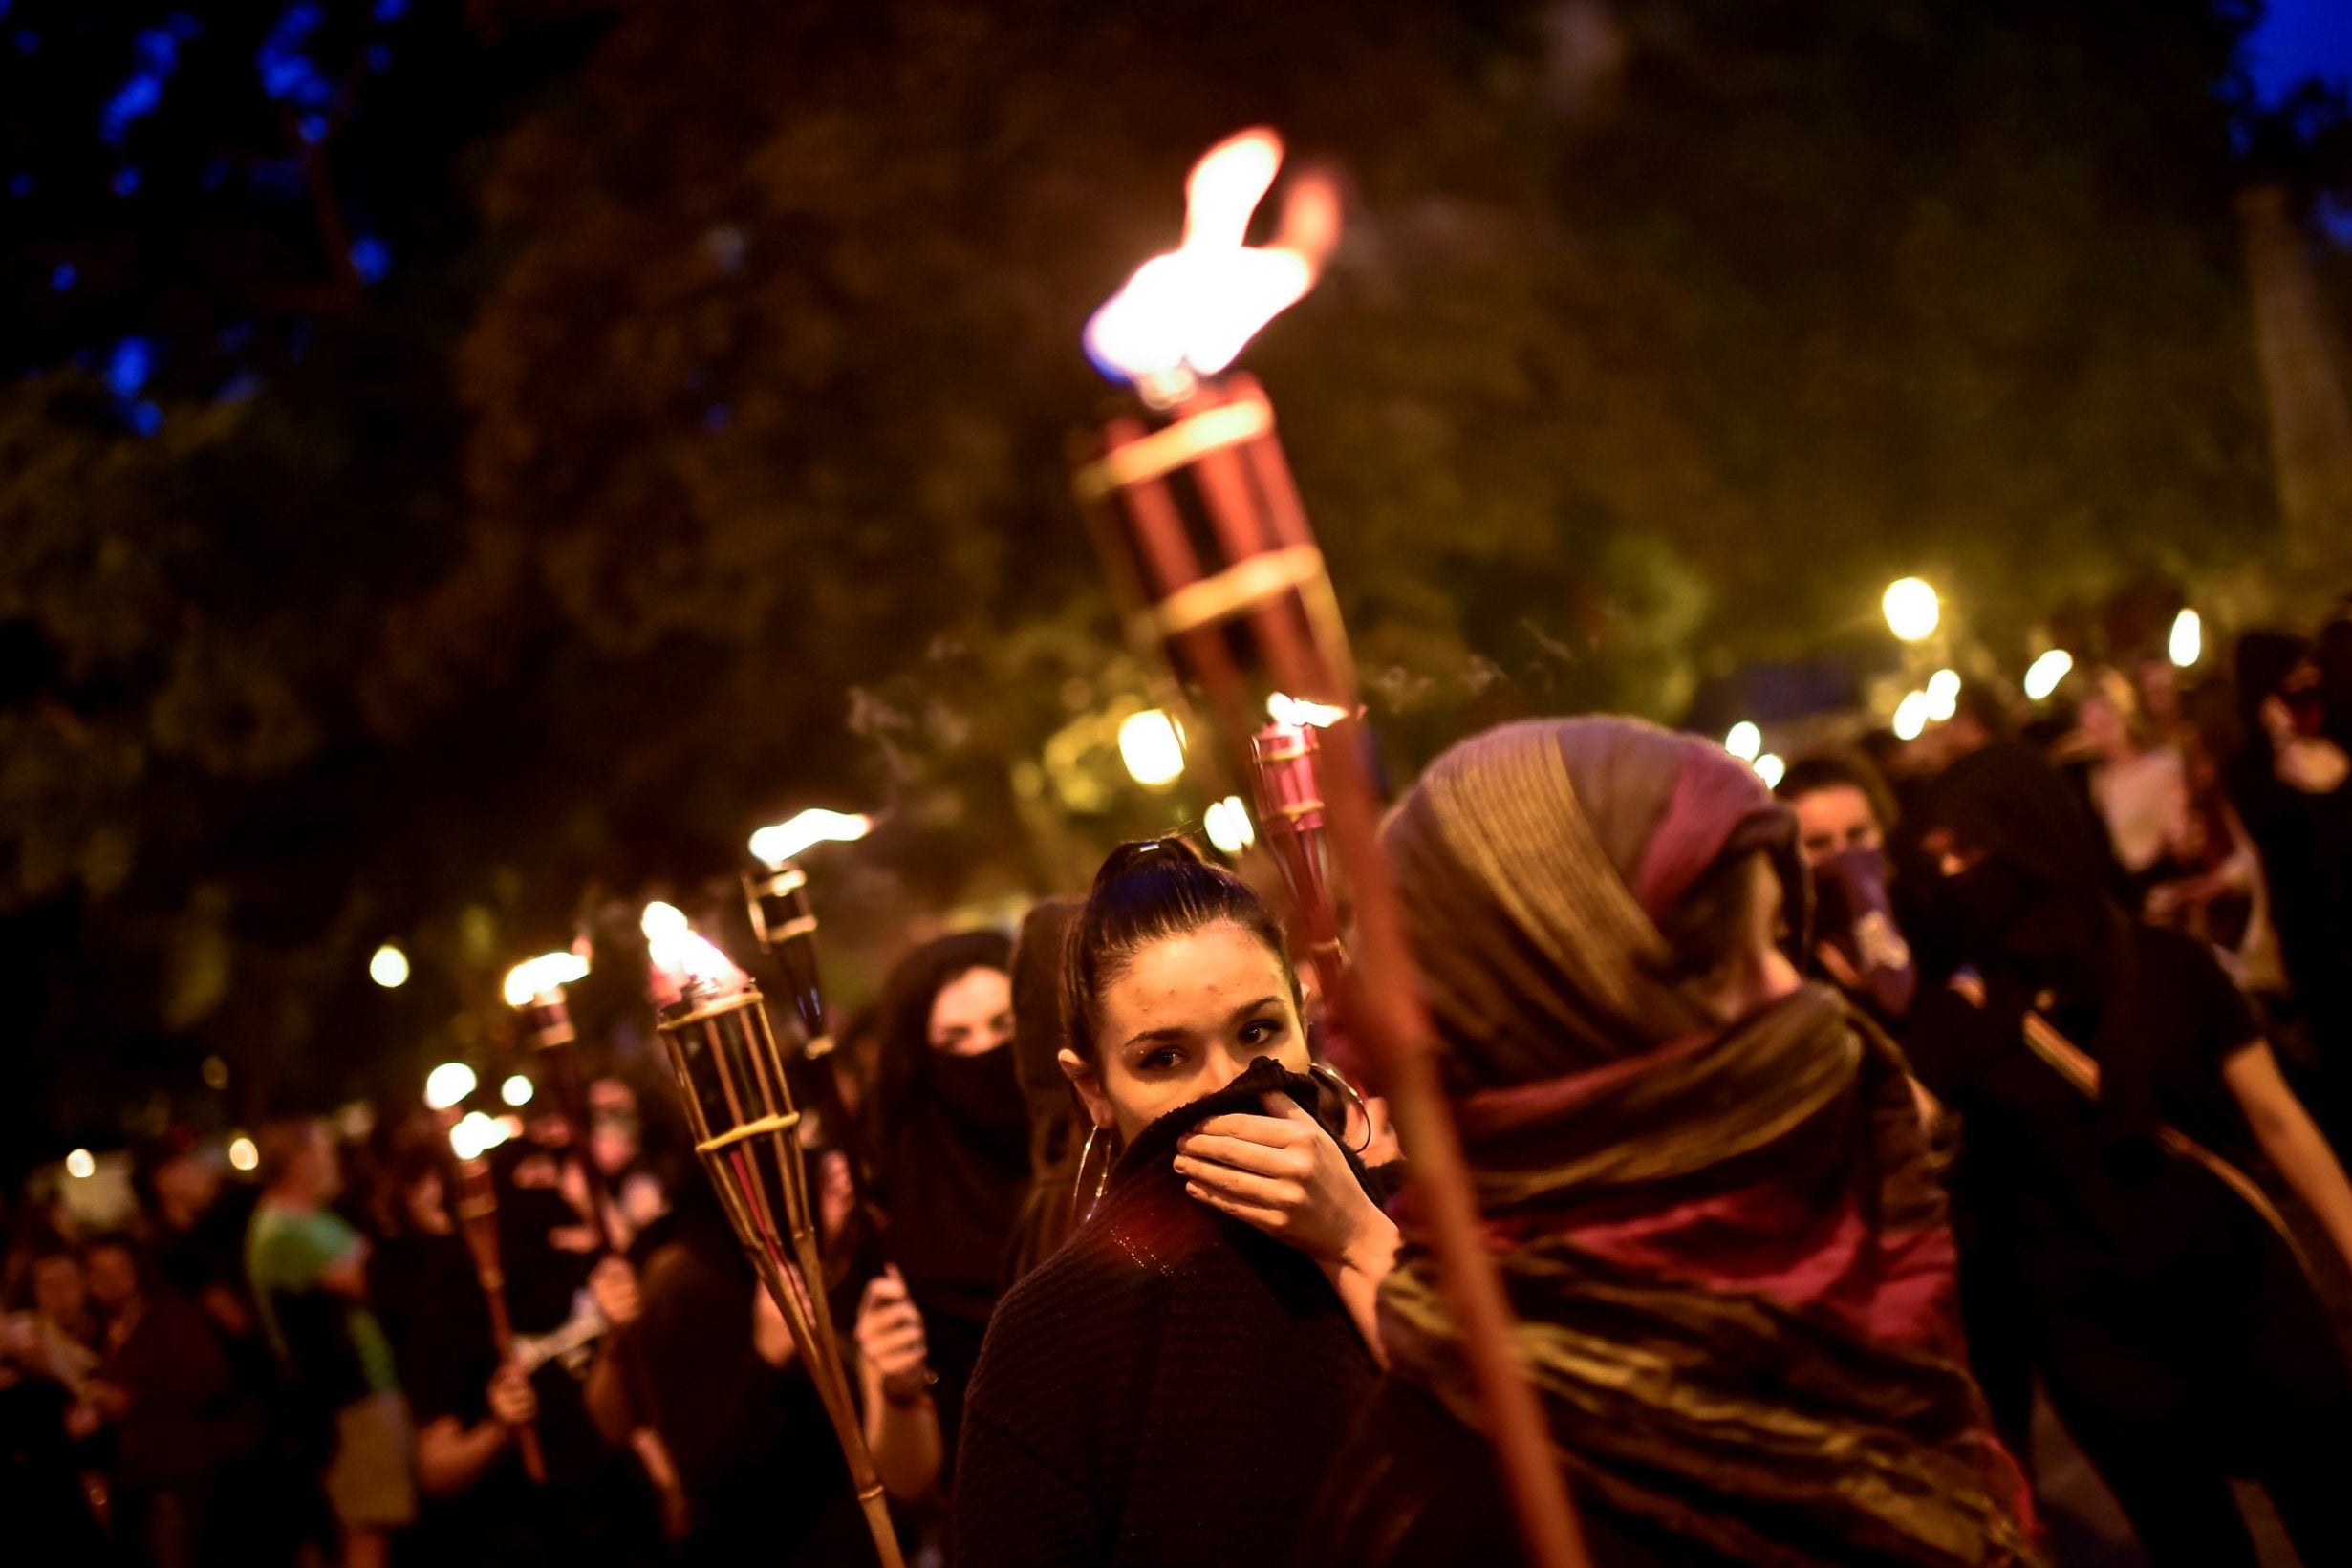 Woman activists hold candles with their faces covered, while taking part in a protest against male violence, a few days before the famous San Fermin festival, in Pamplona, northern Spain, Wednesday, July 4.